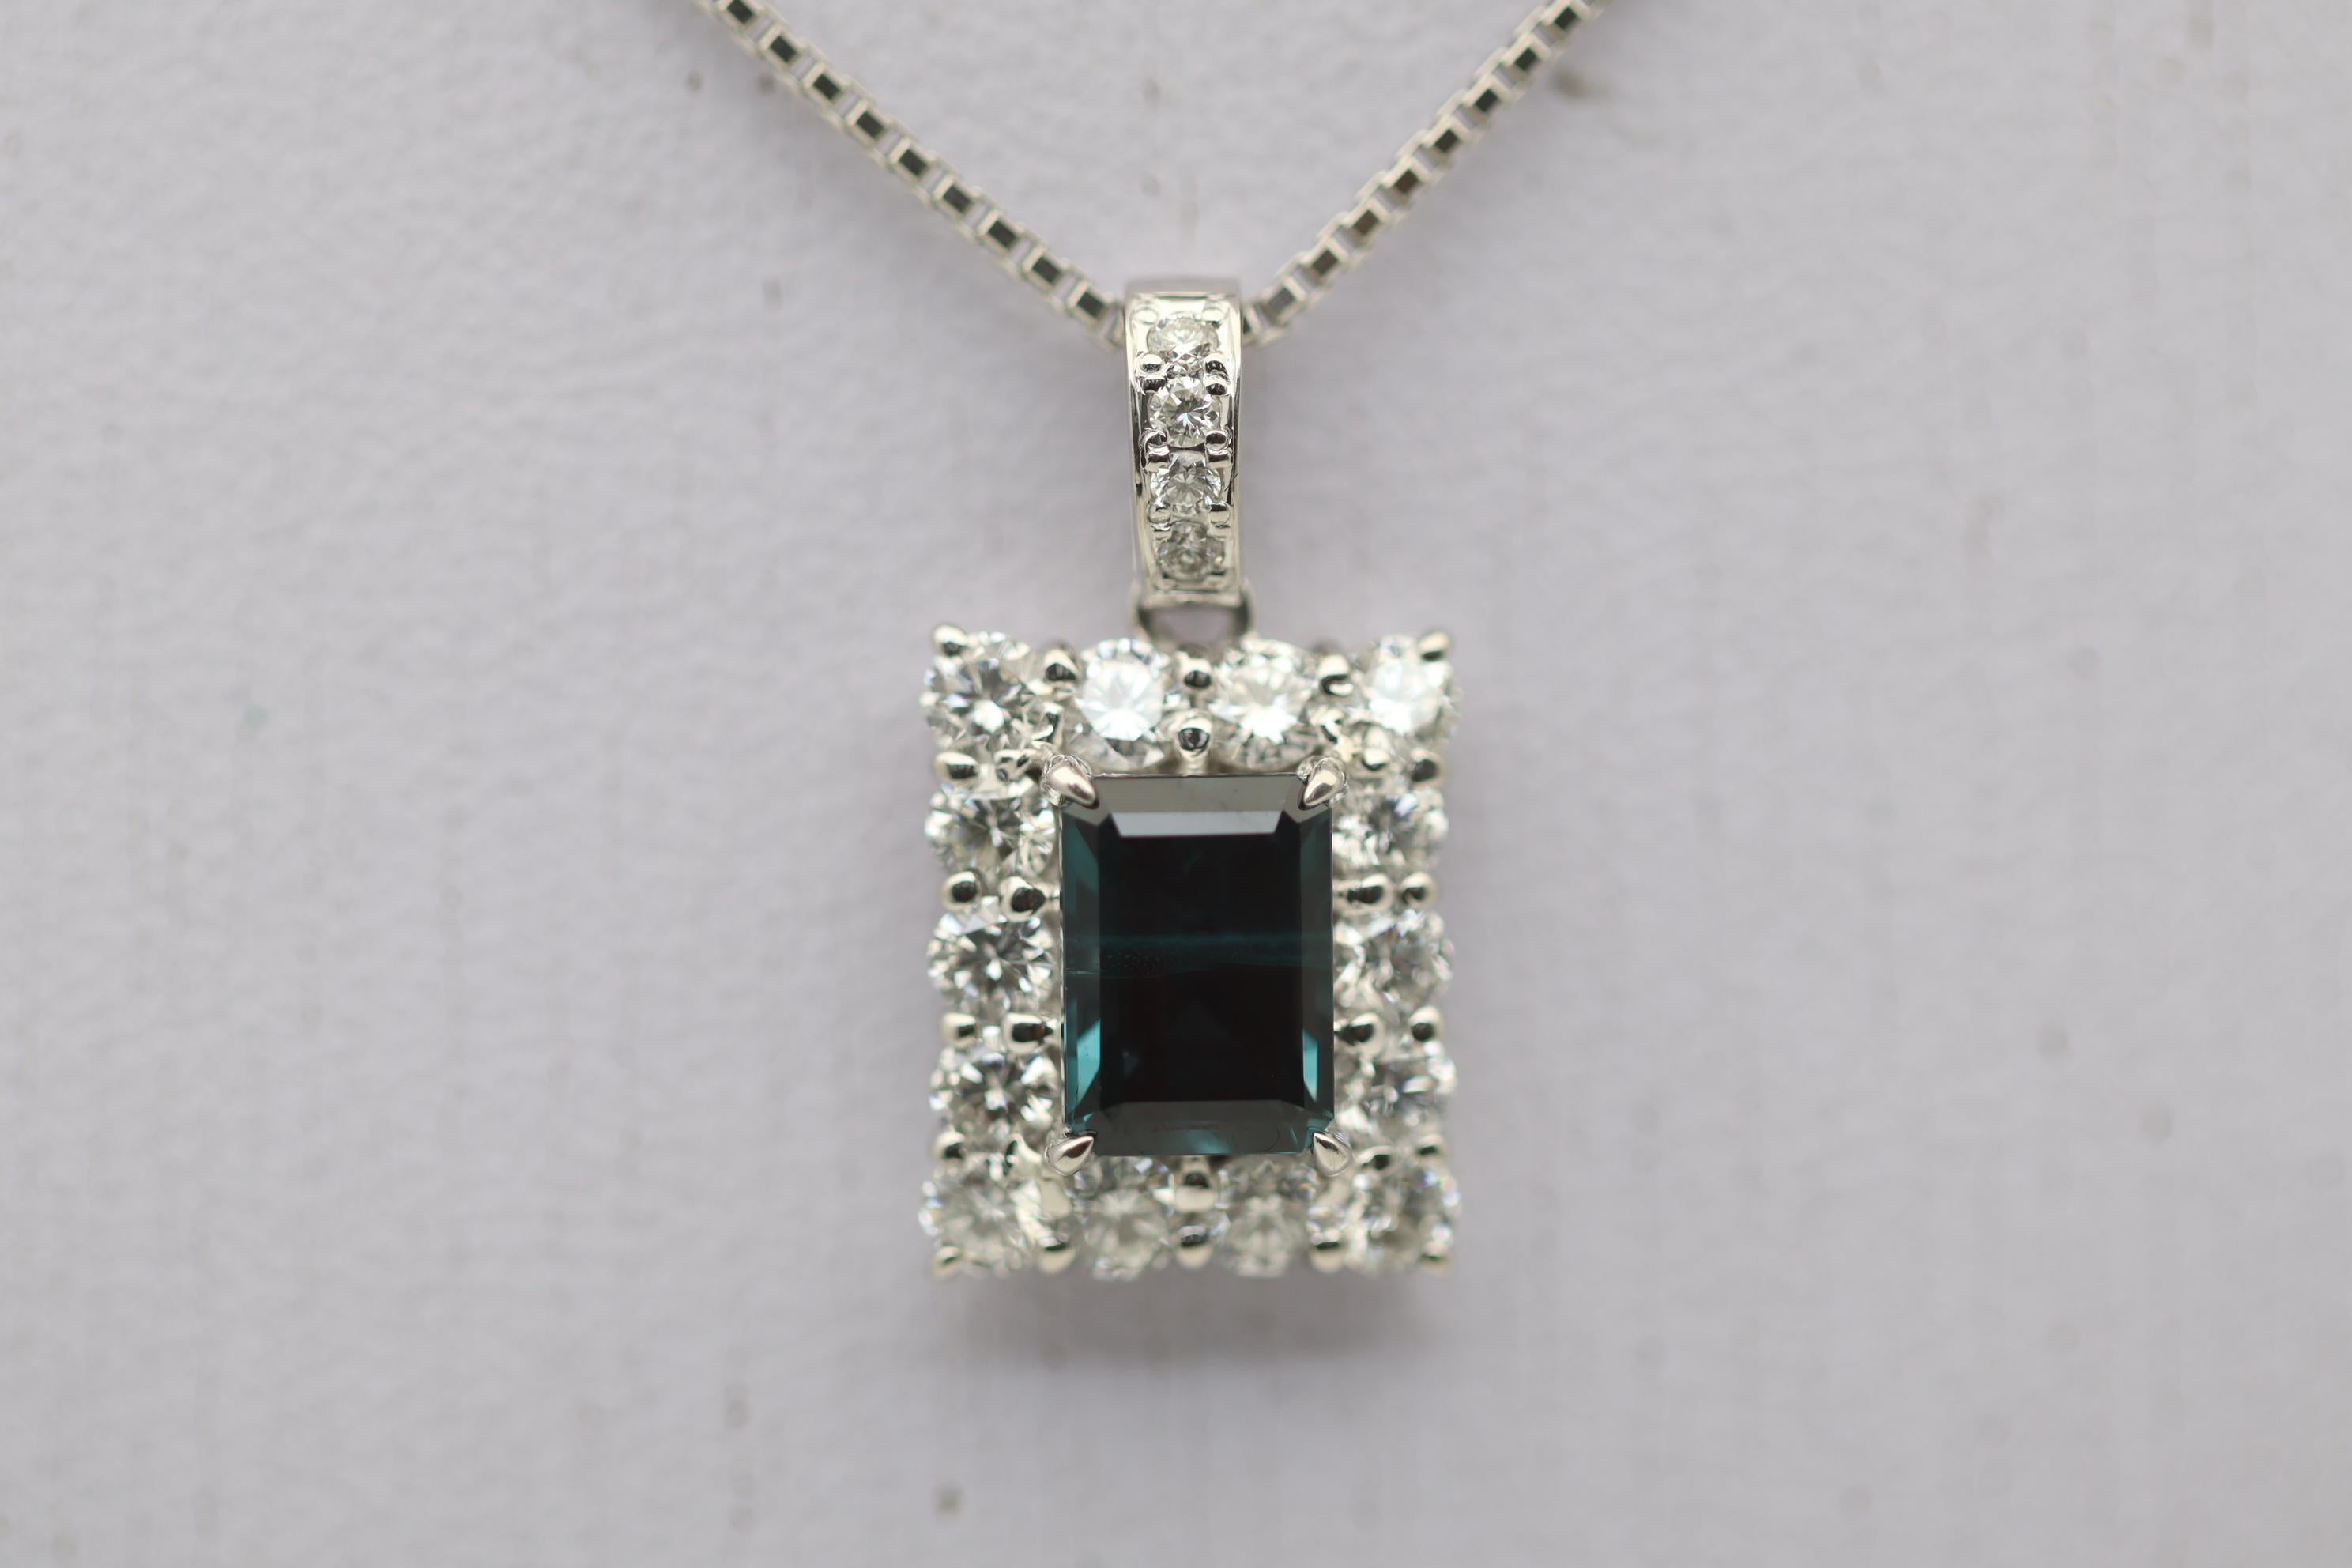 A fine and rare gem alexandrite is showcased on this picture frame diamond pendant. The alexandrite weighs an impressive 1.84 carats and has excellent color change. In normal daylight the stone is a rich blue-green color and in incandescent or